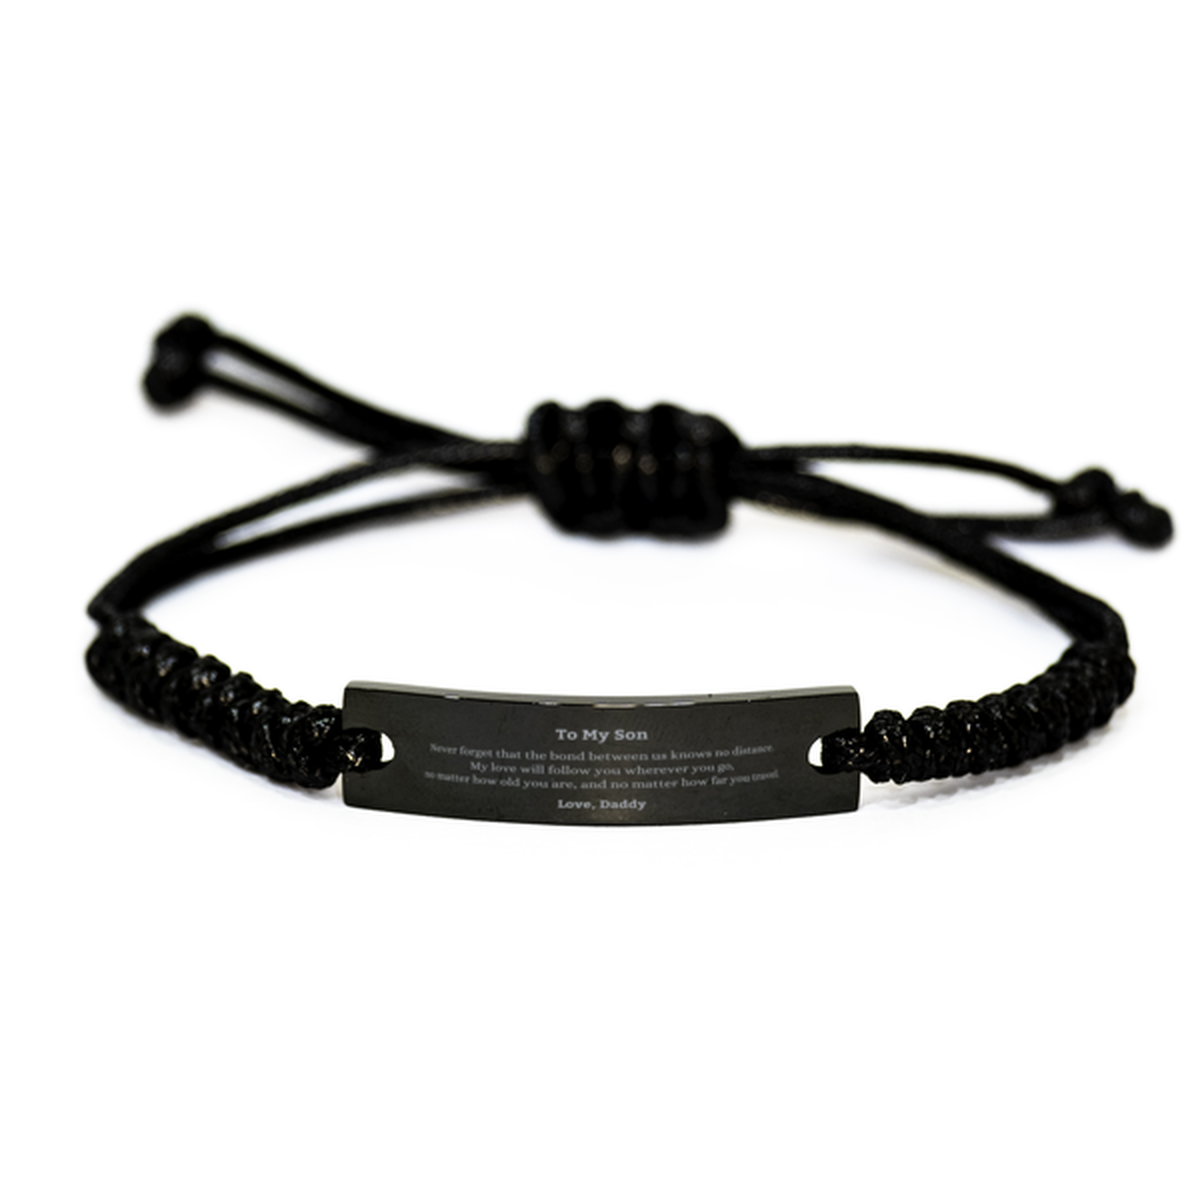 Son Birthday Gifts from Daddy, Adjustable Black Rope Bracelet for Son Christmas Graduation Unique Gifts Son Never forget that the bond between us knows no distance. Love, Daddy